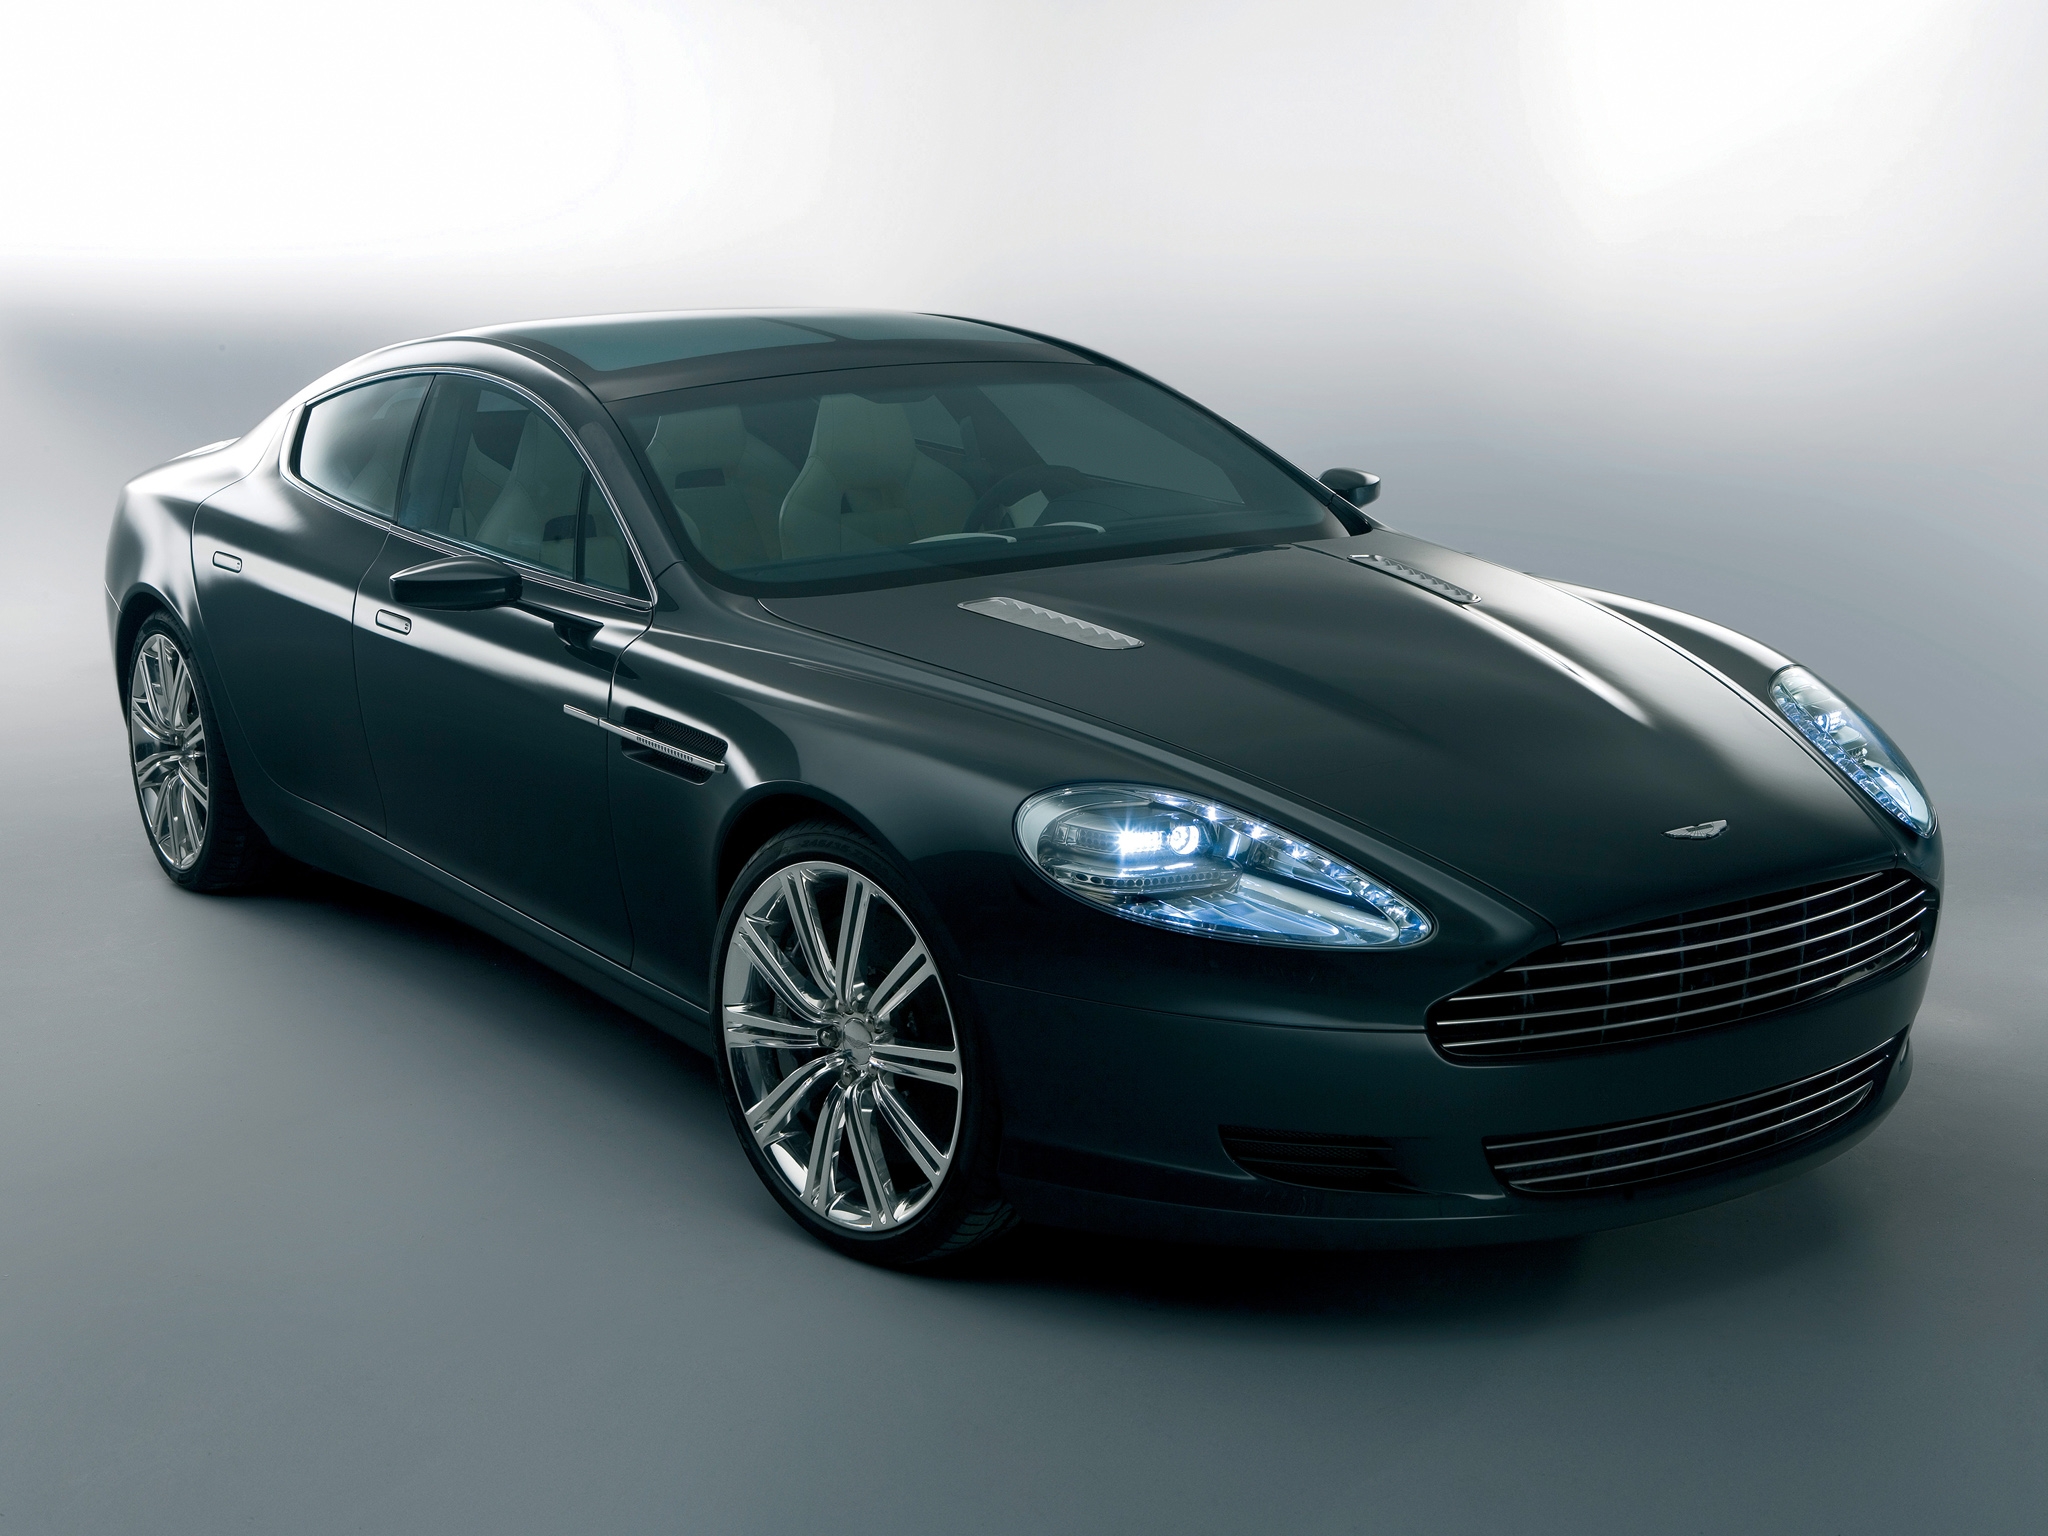 aston martin, cars, black, front view, style, concept car, 2006, rapide